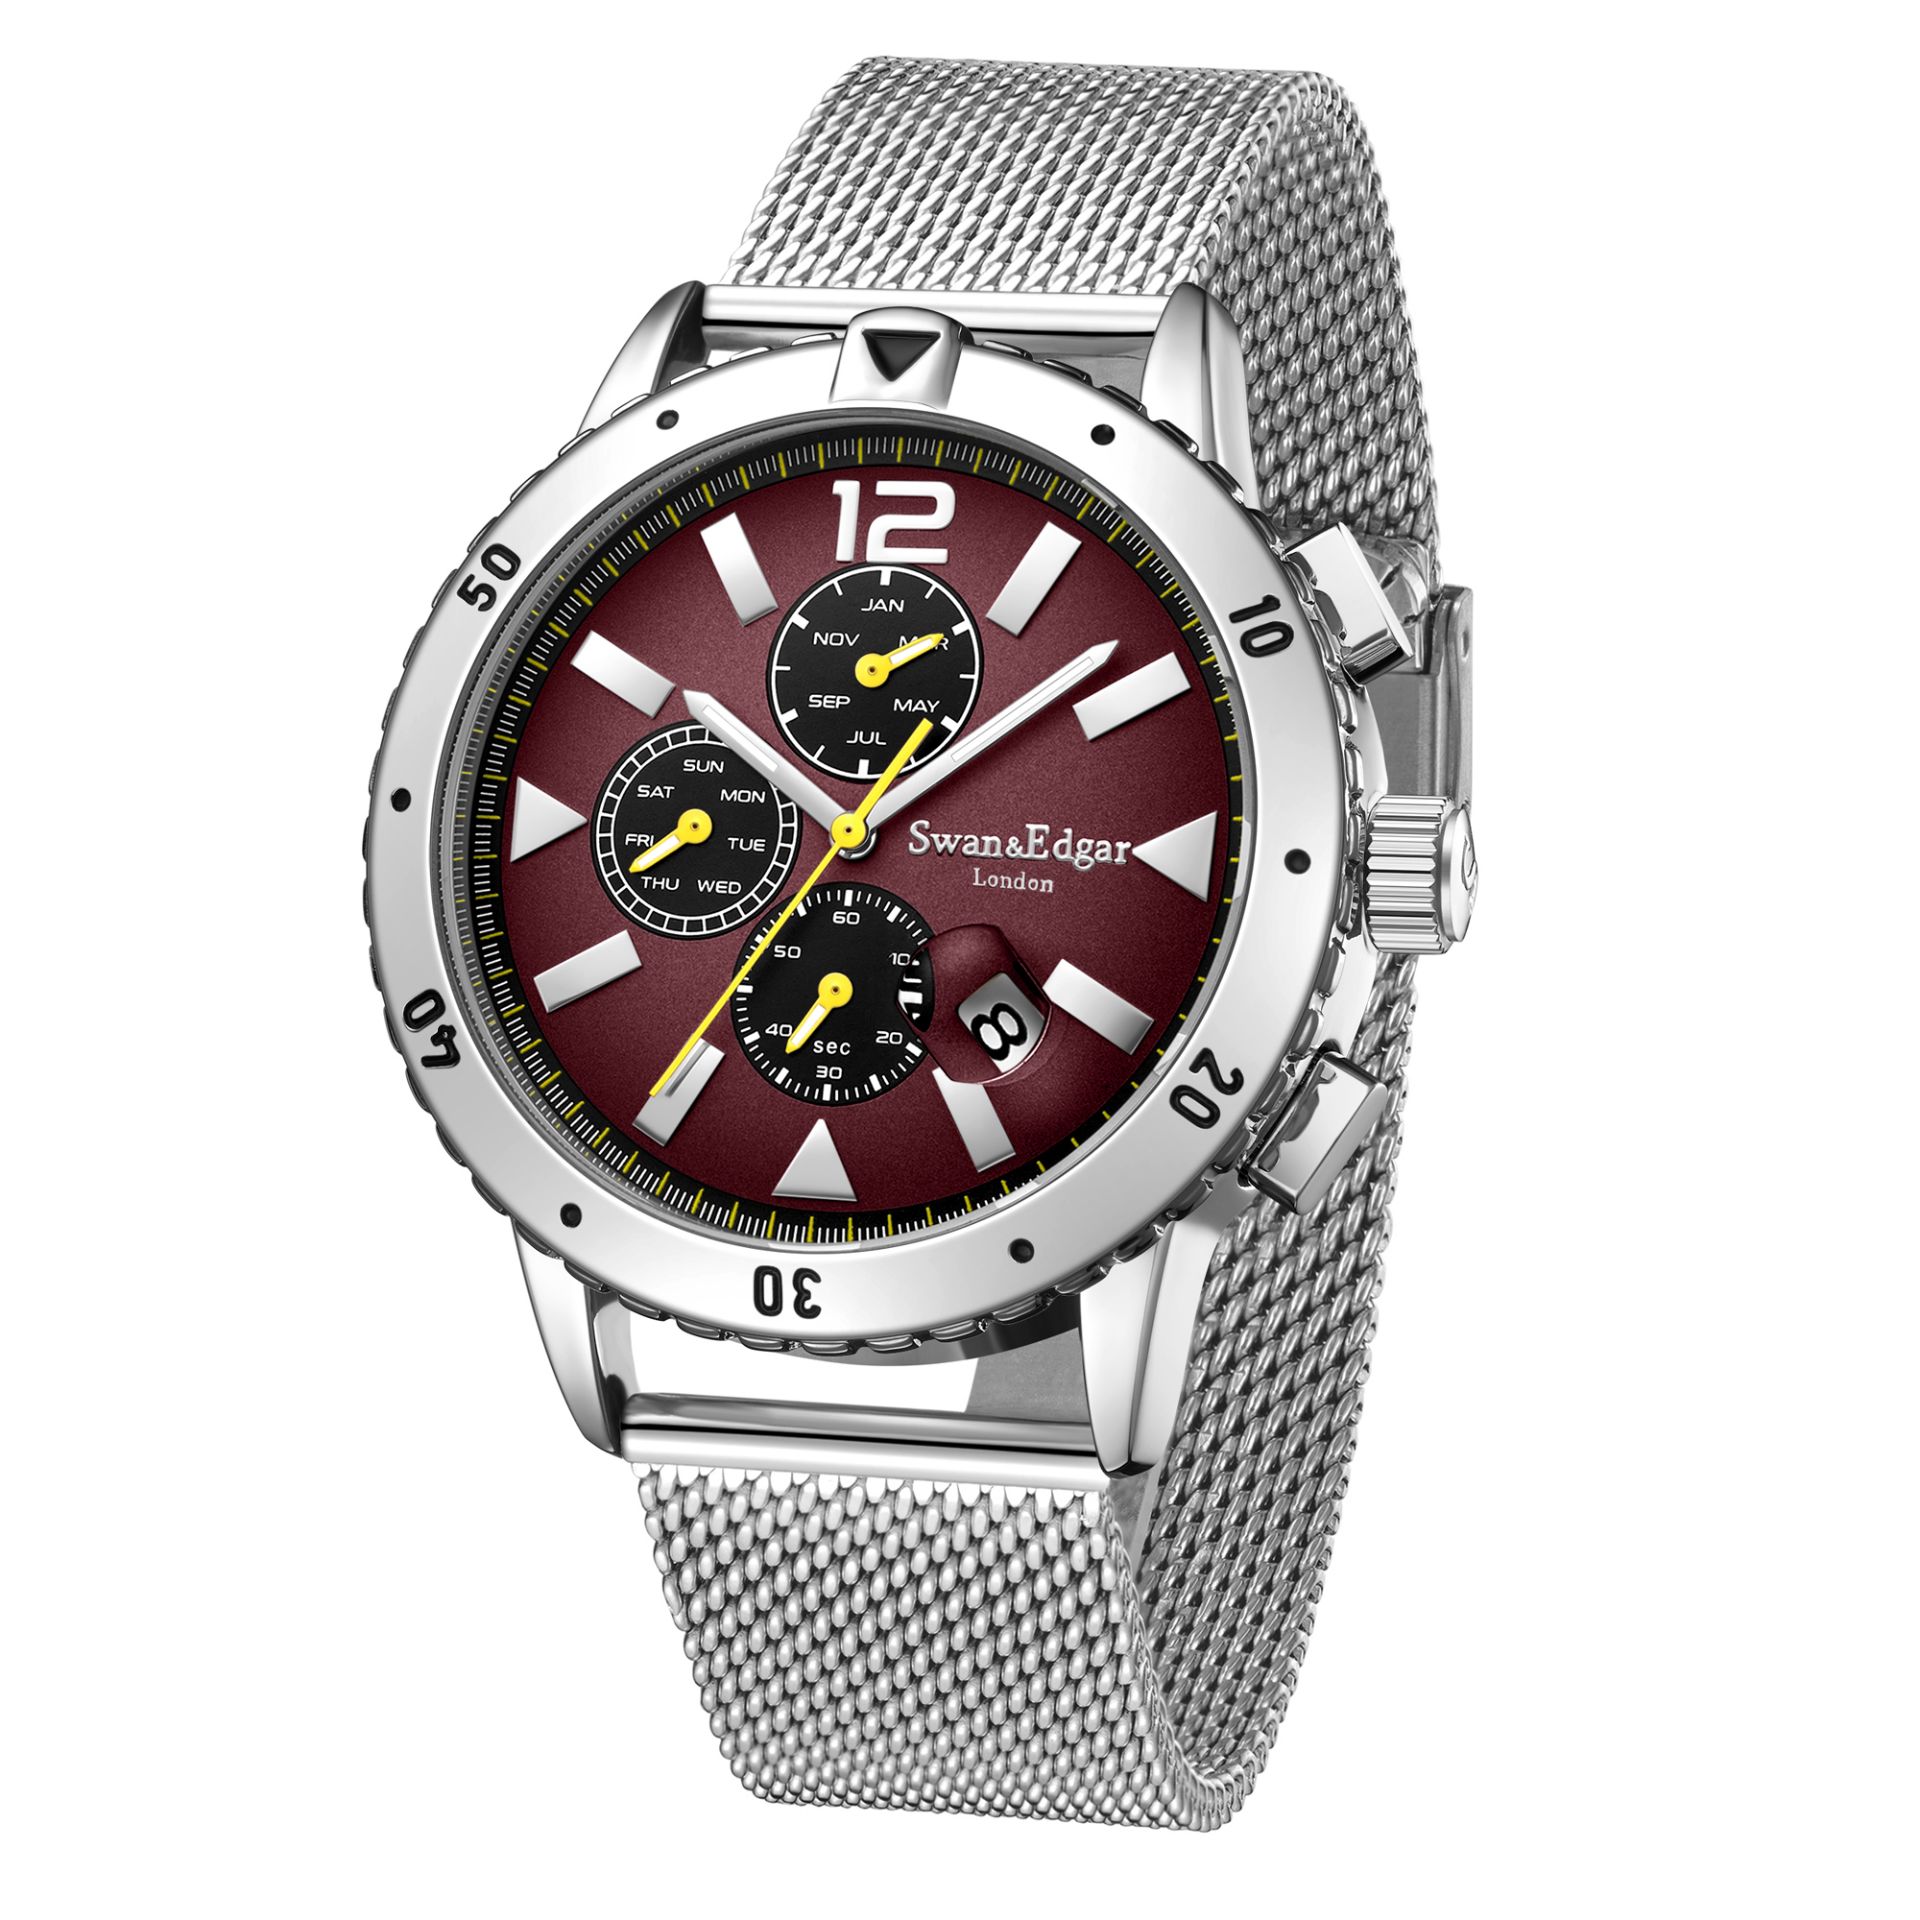 Swan & Edgar Hand Assembled Catalyst Automatic Silver Red Watch - Free Delivery & 5 Year Warranty - Image 4 of 5